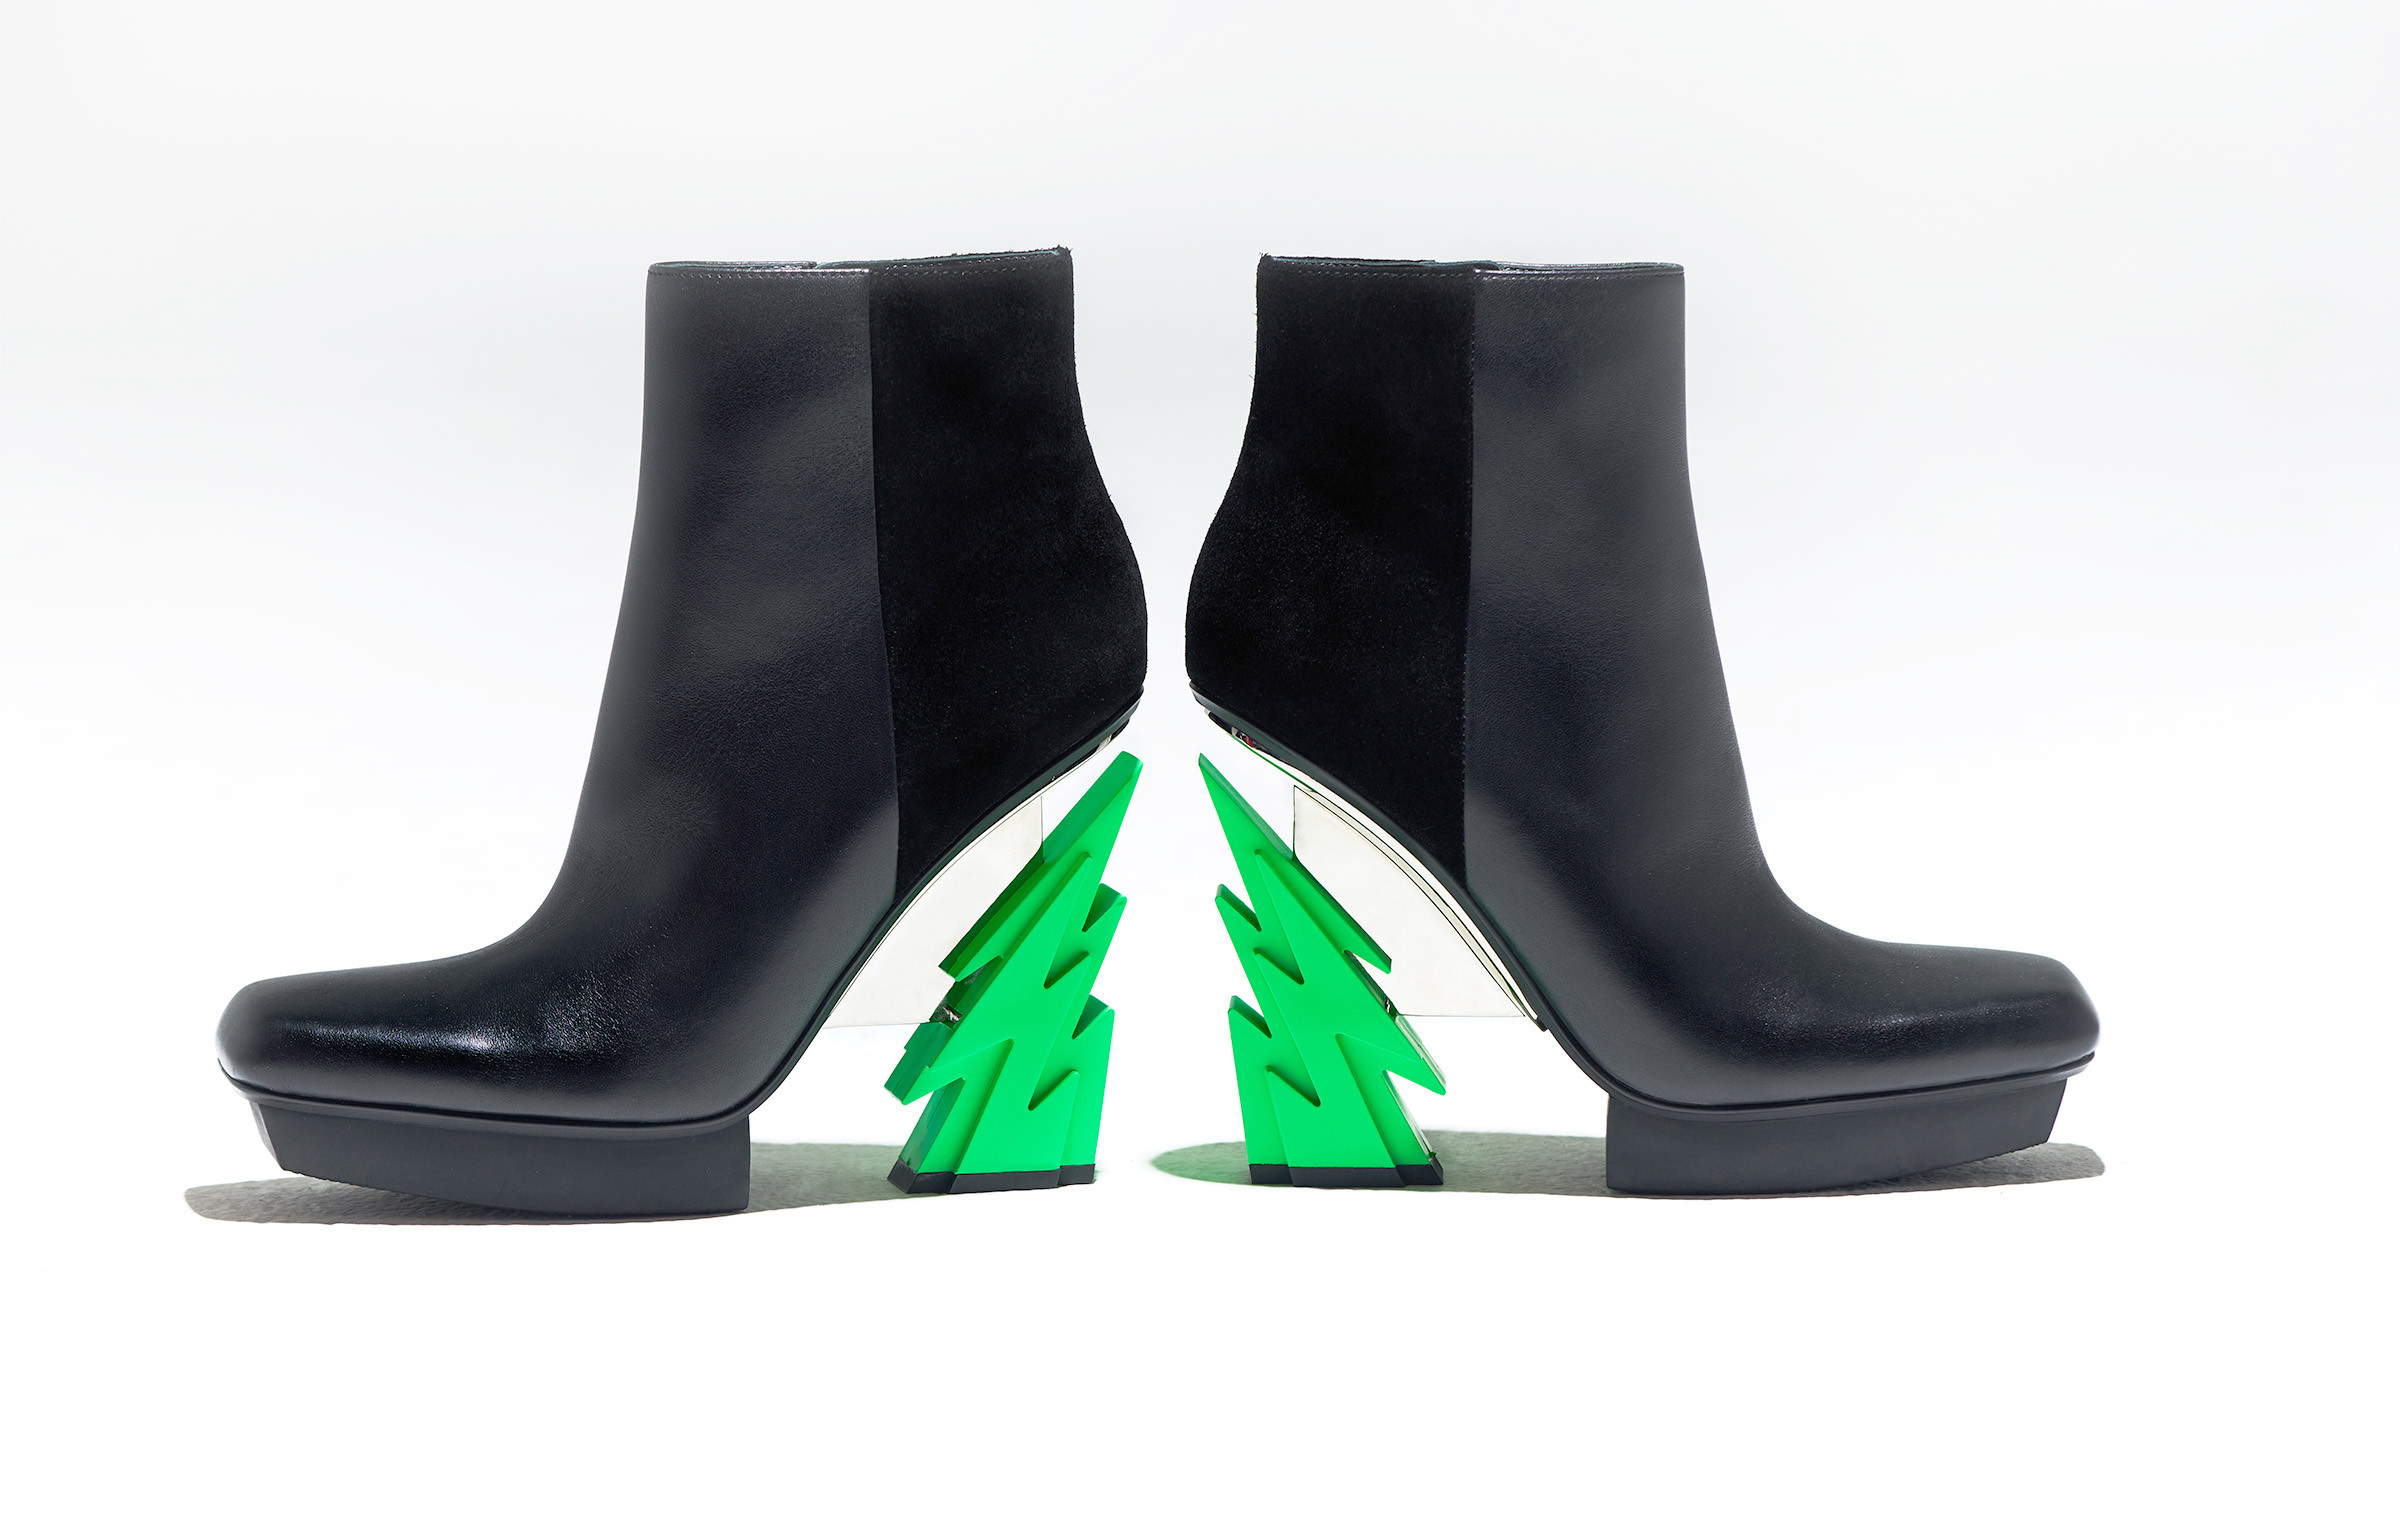 The flashiest model in town - UN Glam Square Boot